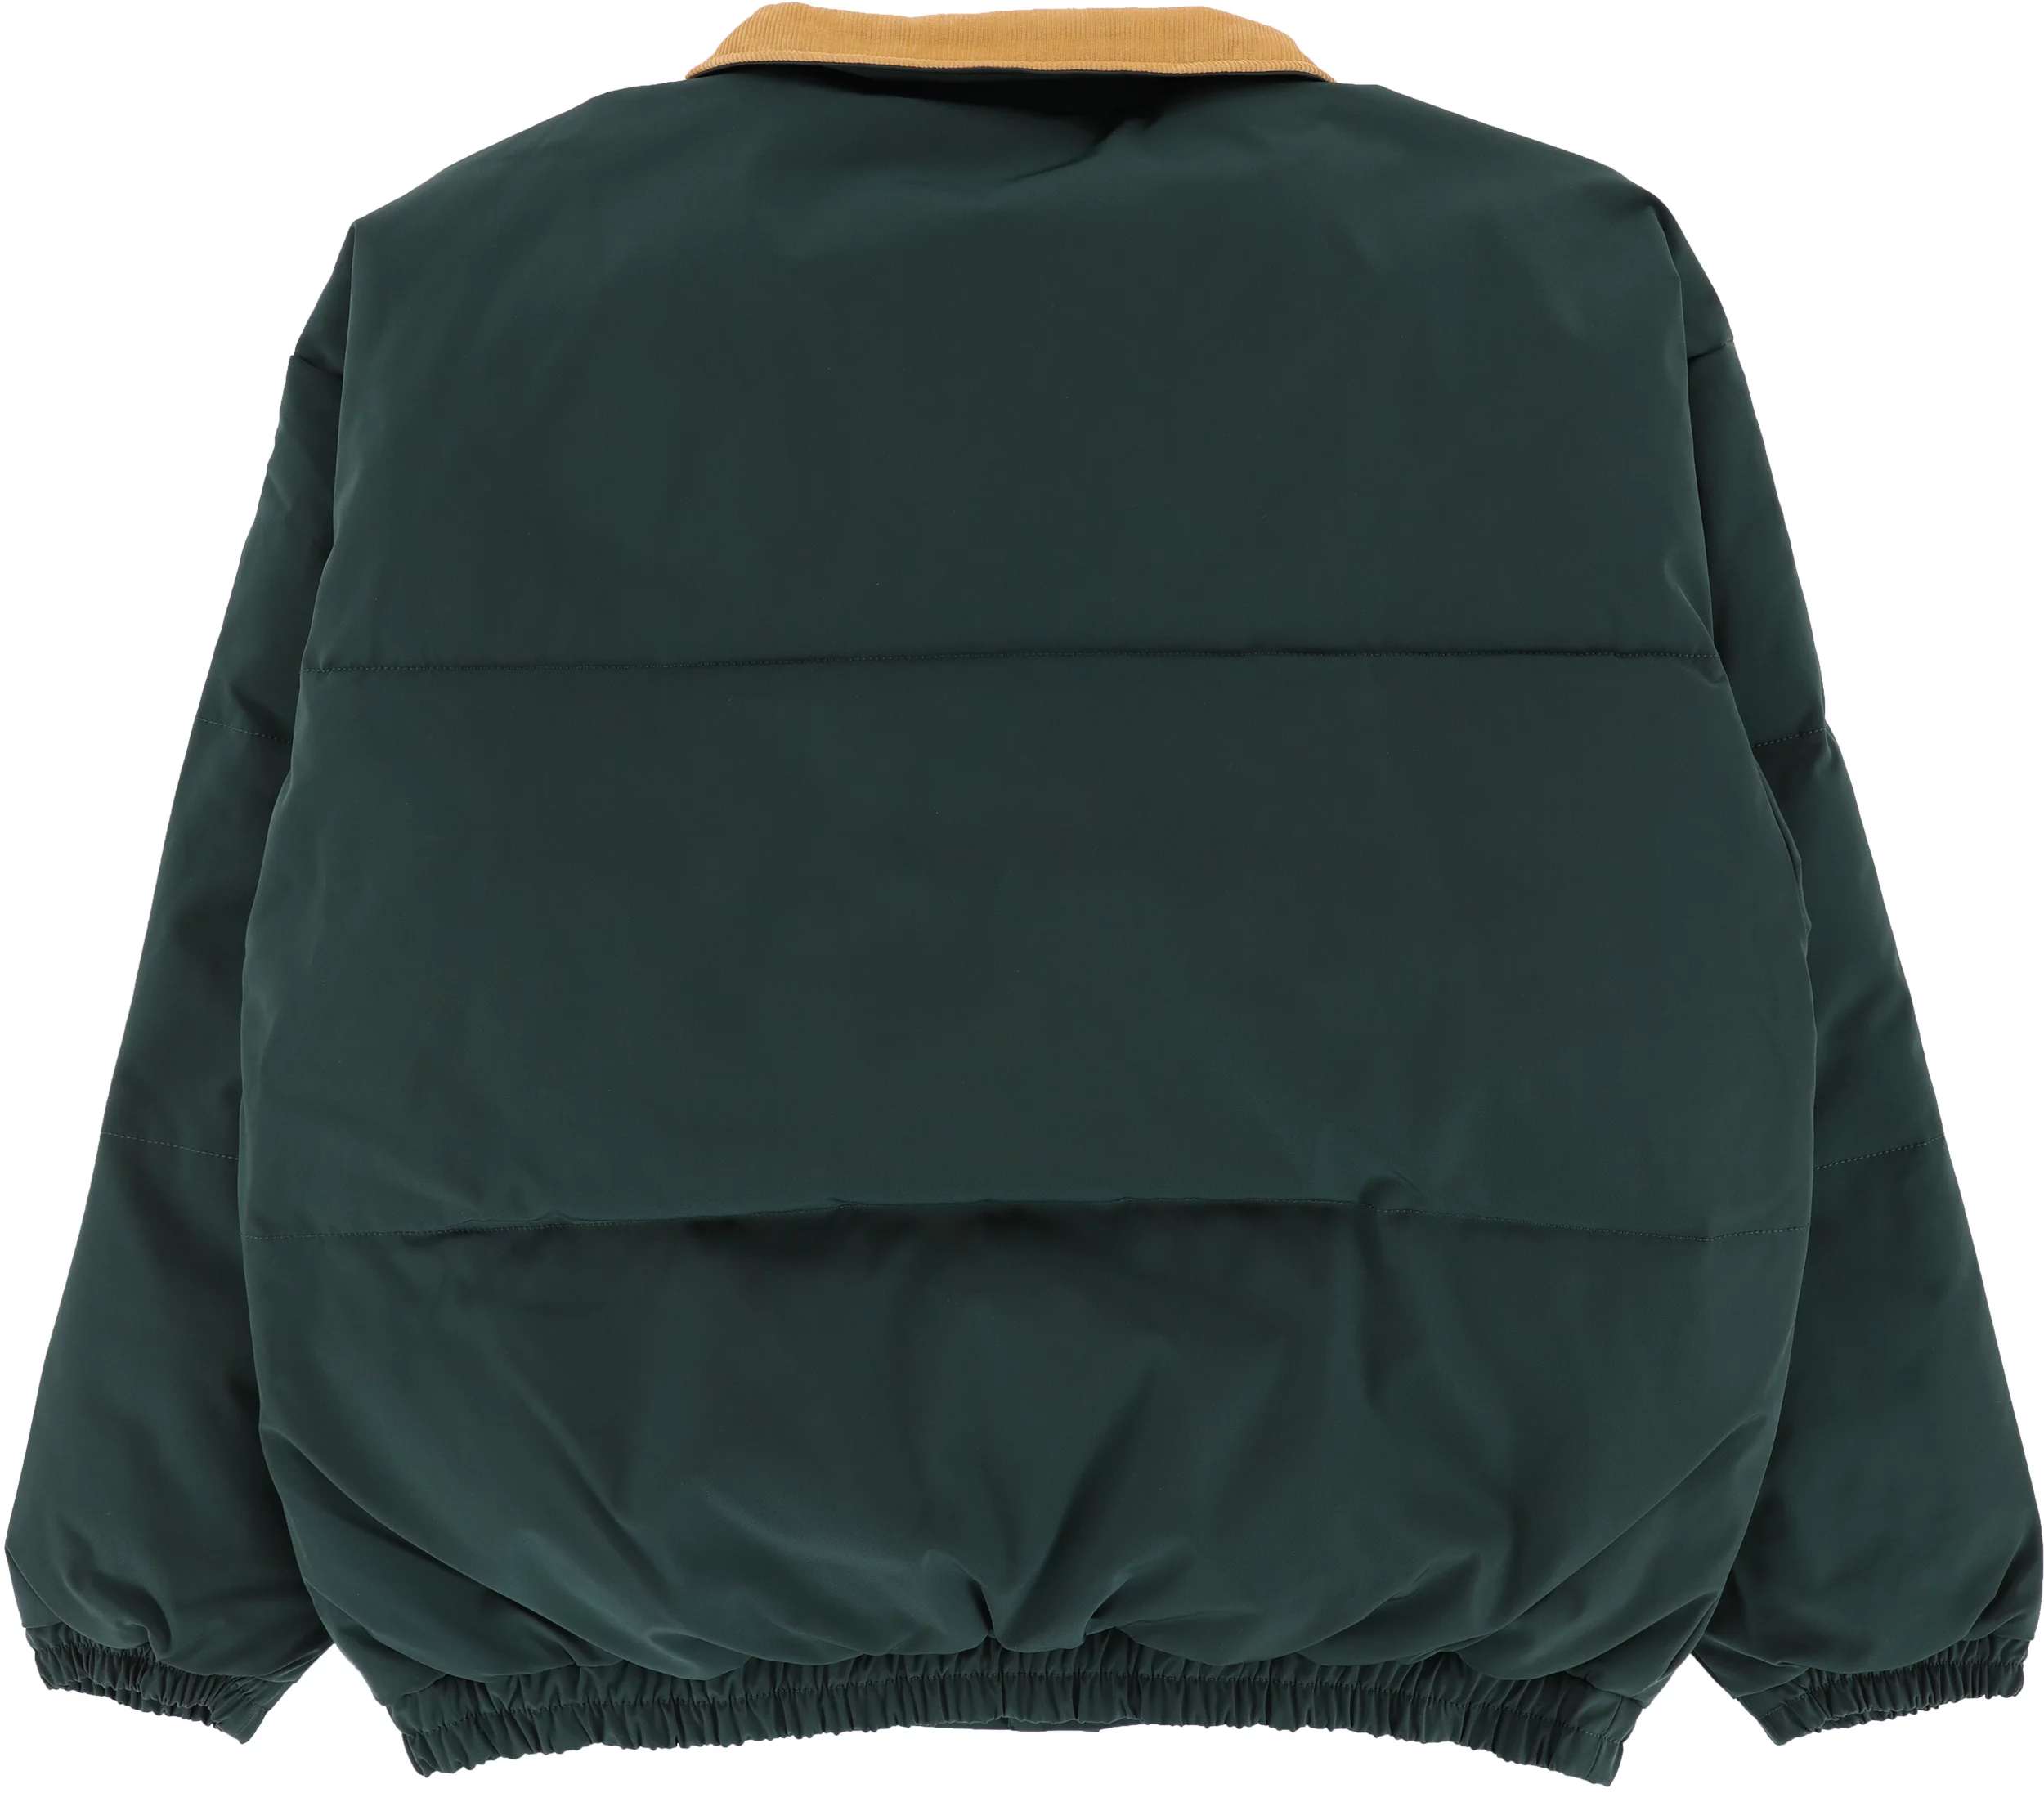 Obey Whispers Jacket - green gables multi | Tactics